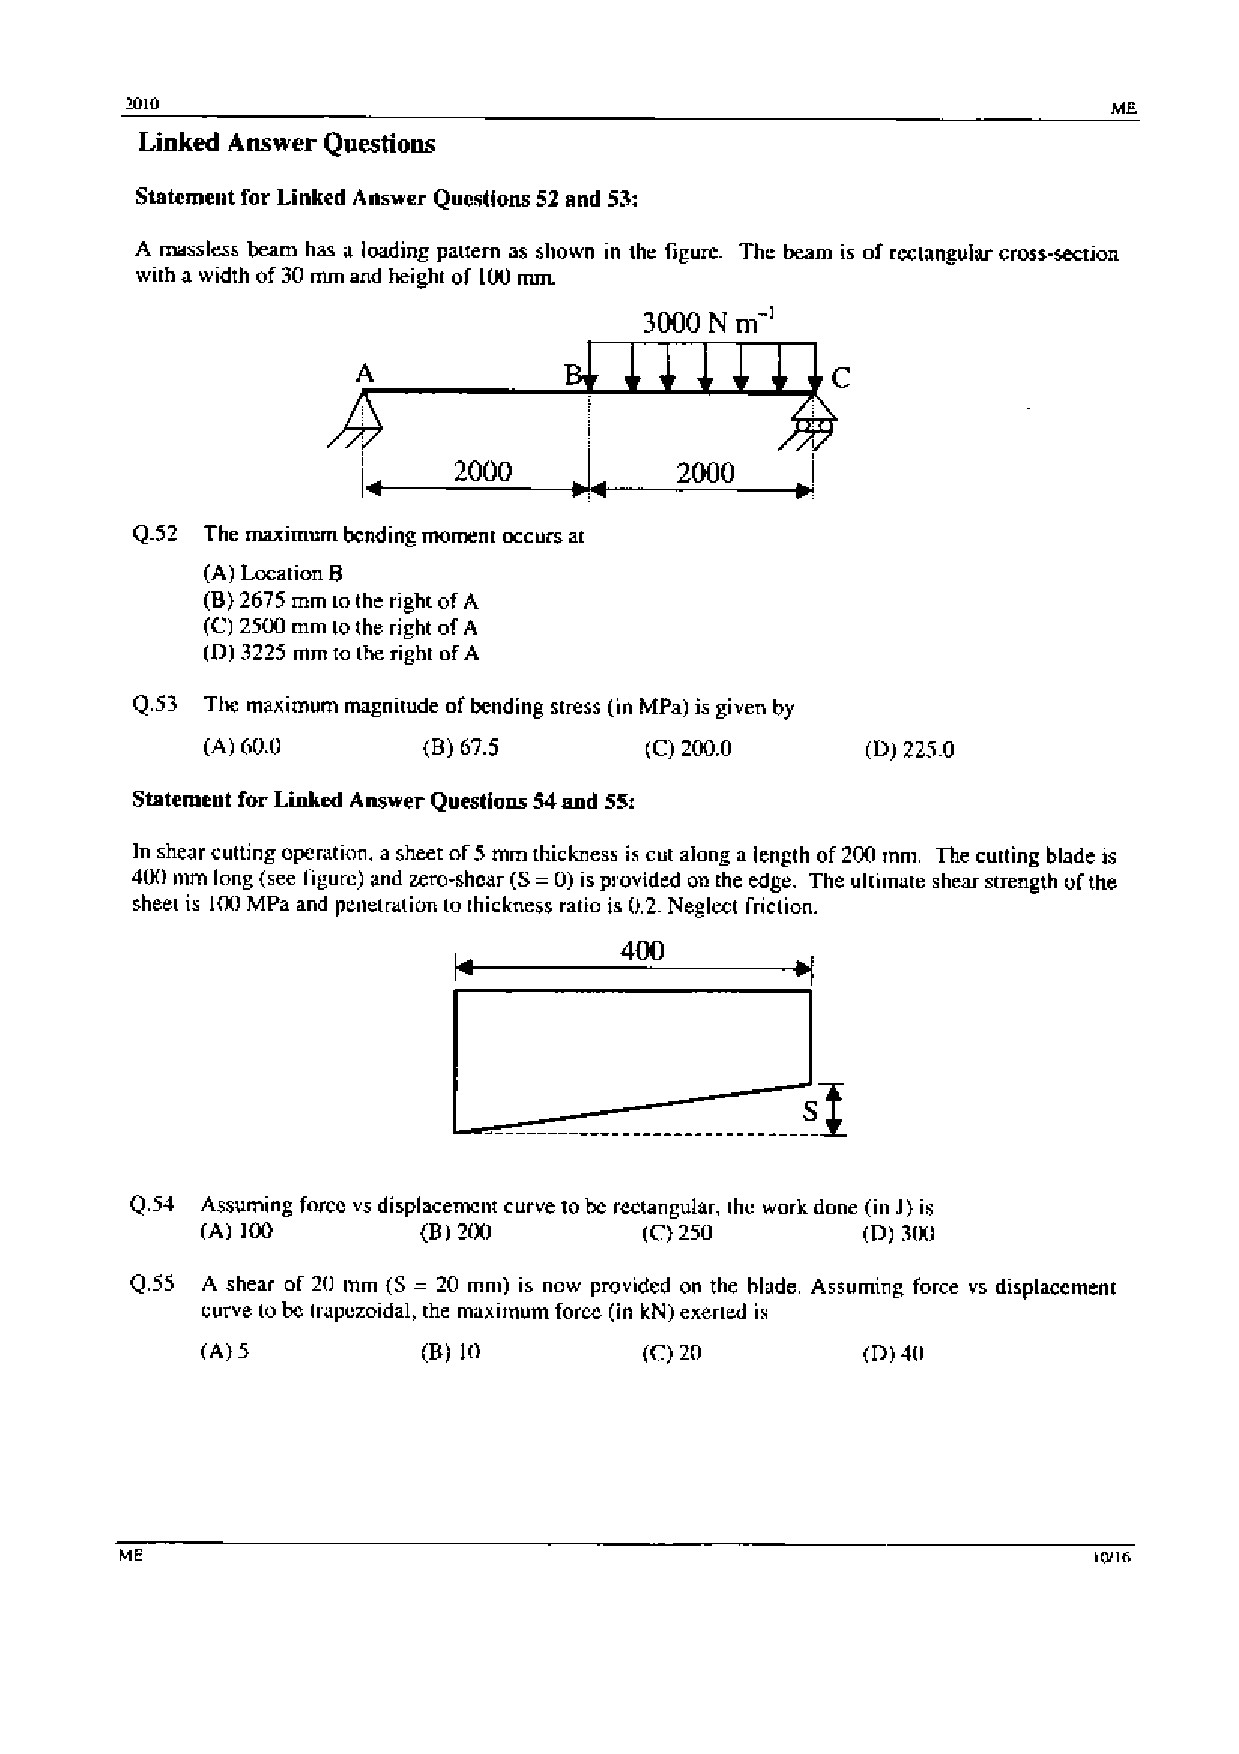 GATE Exam Question Paper 2010 Mechanical Engineering 10